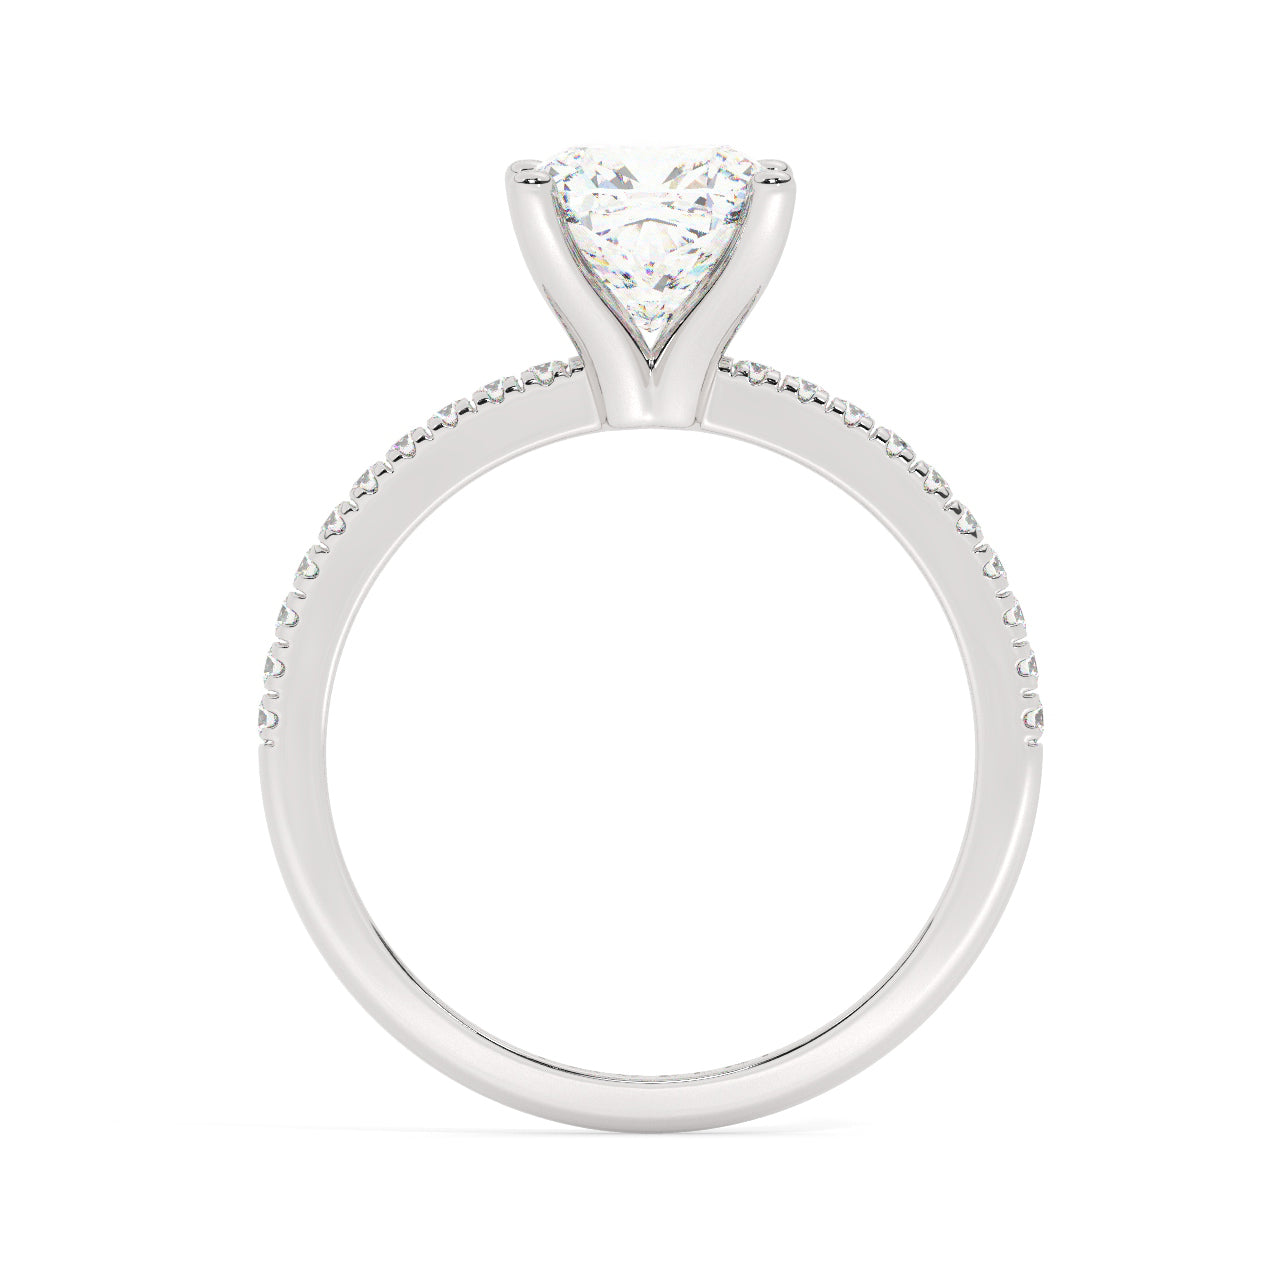 Round Cut Diamond Ring set on a Pavé Band in White Gold - Side View